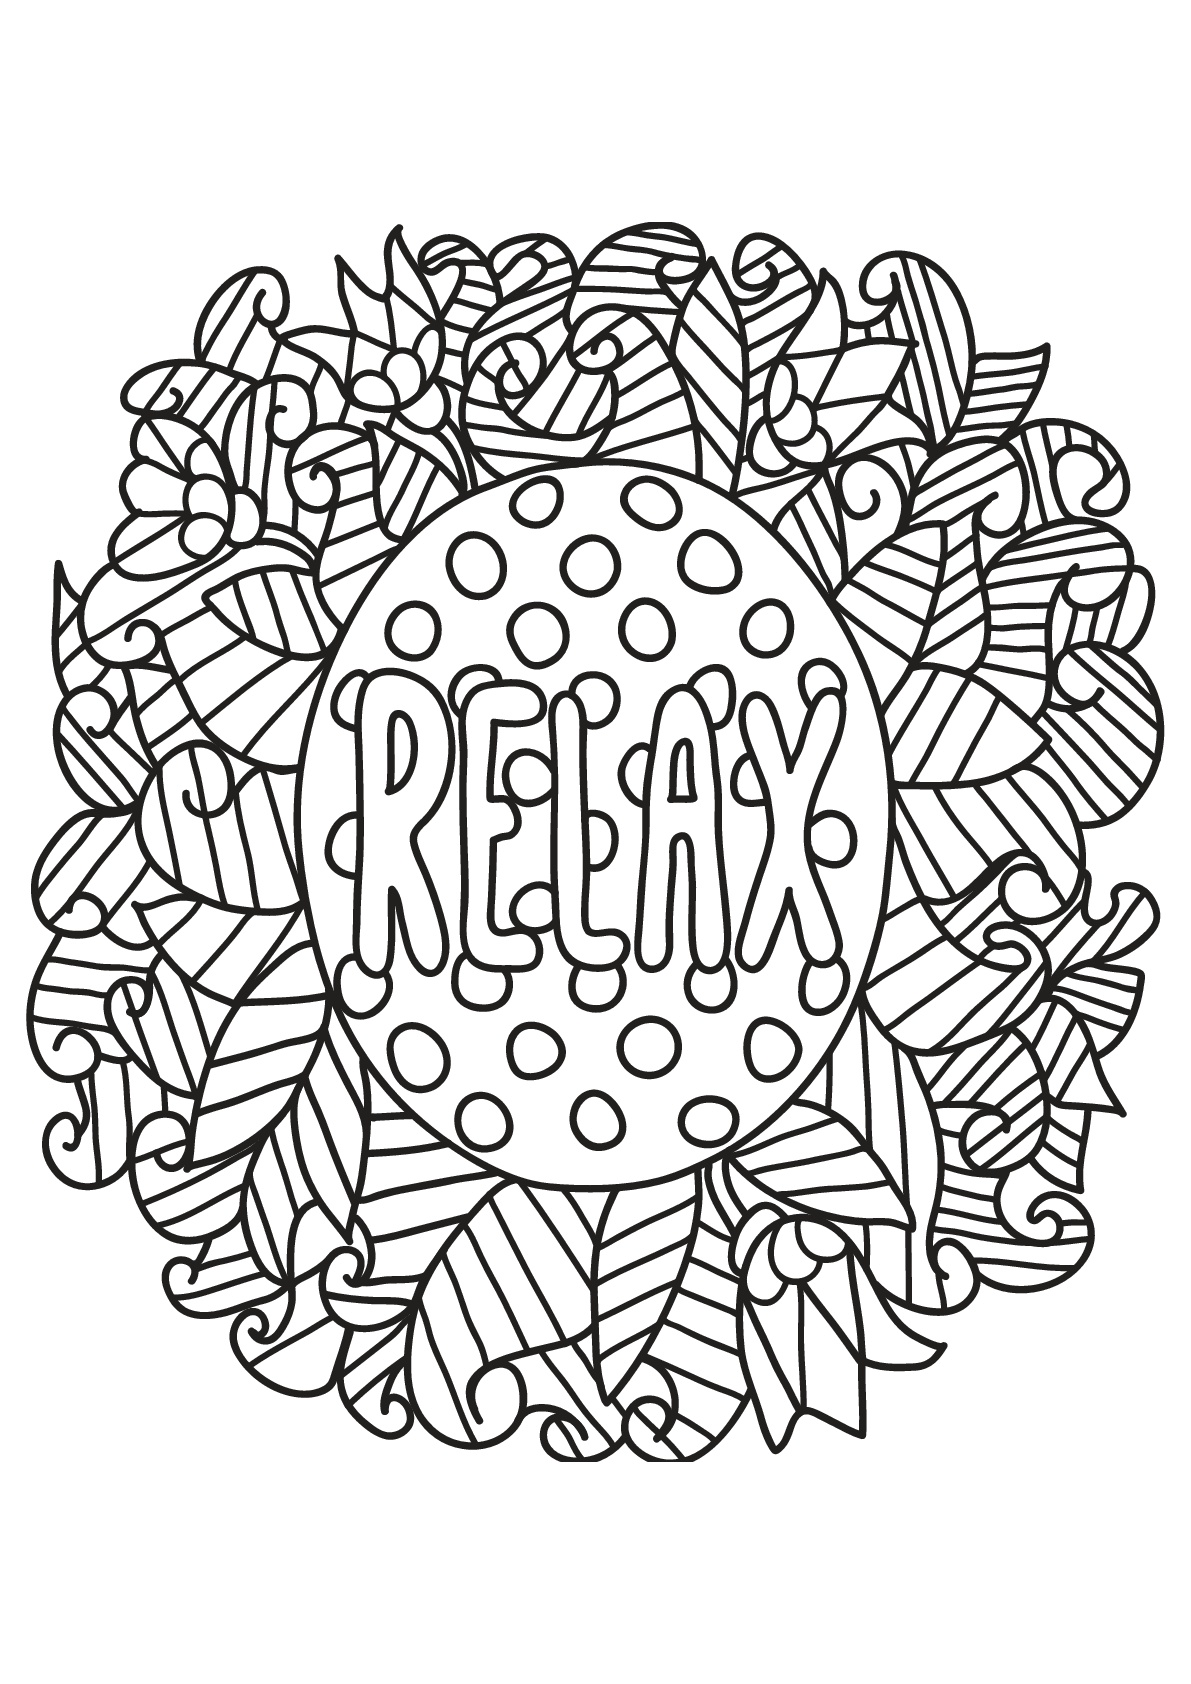 Free book quote 19 - Positive & inspiring quotes Adult Coloring Pages